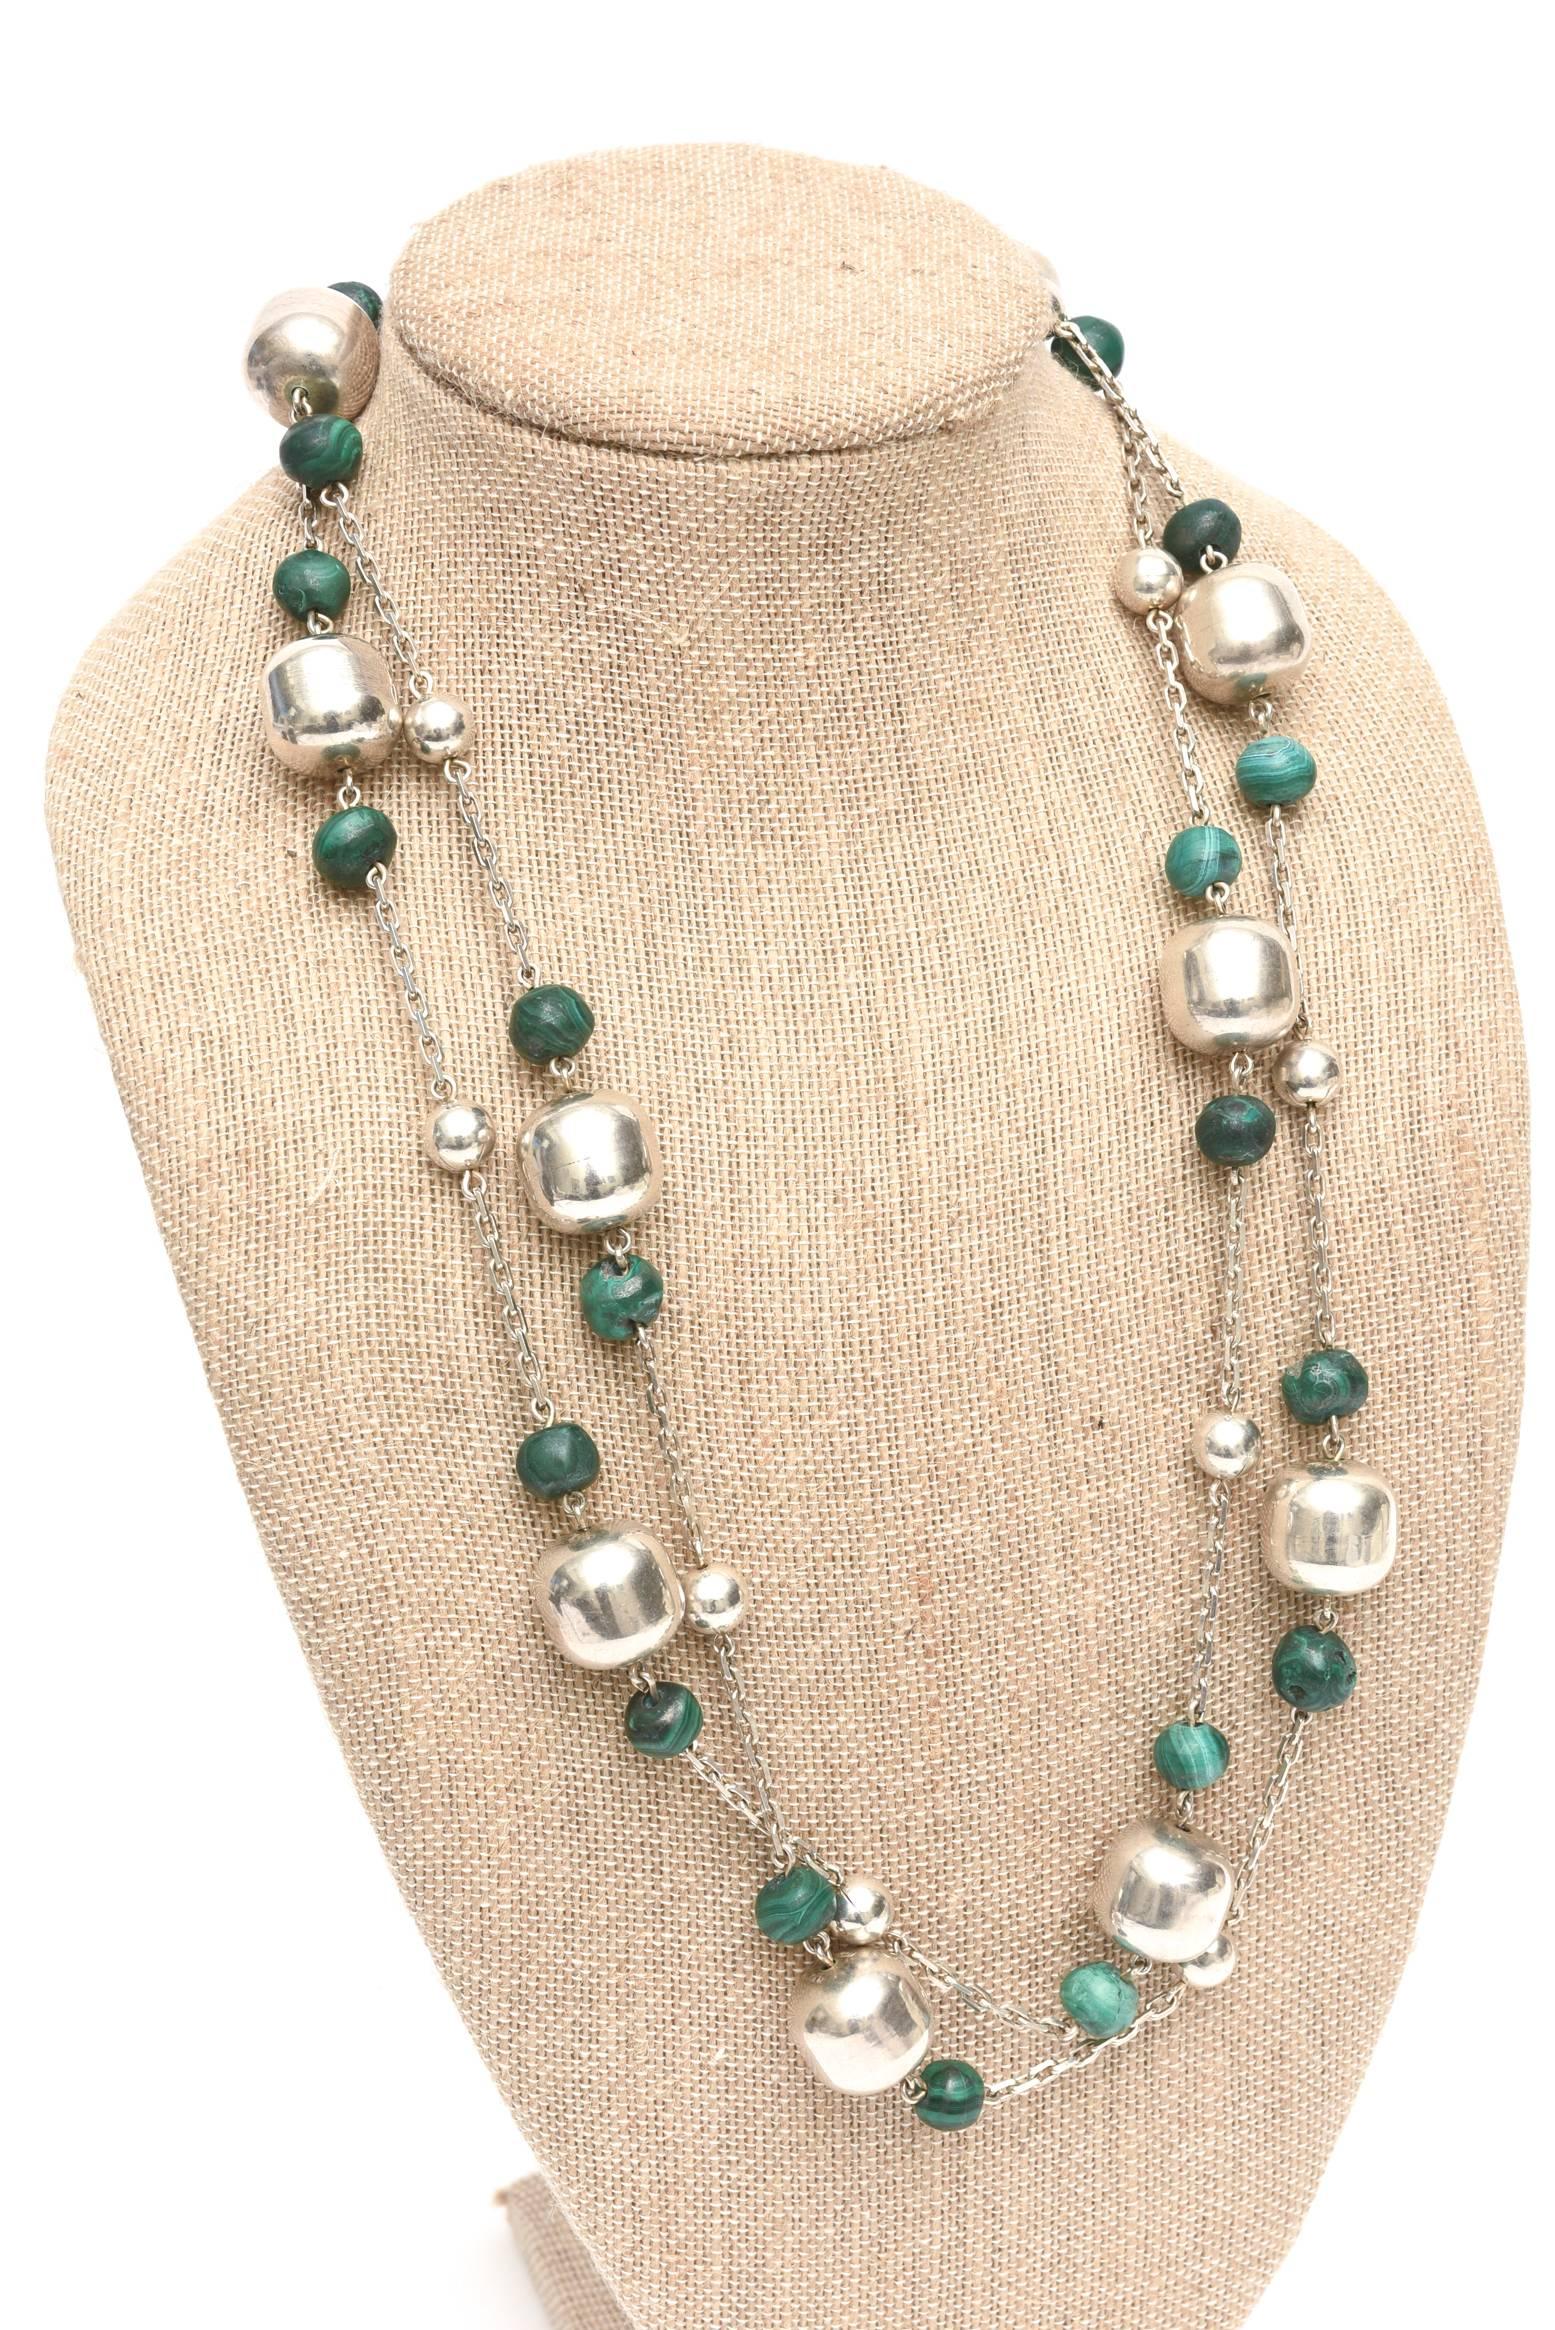 This gorgeous sterling silver and malachite strand beaded wrap necklace can be worn at different lengths when doubled or as one long dramatic strand. The sterling barrel beads are large and compliment the malachite rounded beads with an open chain